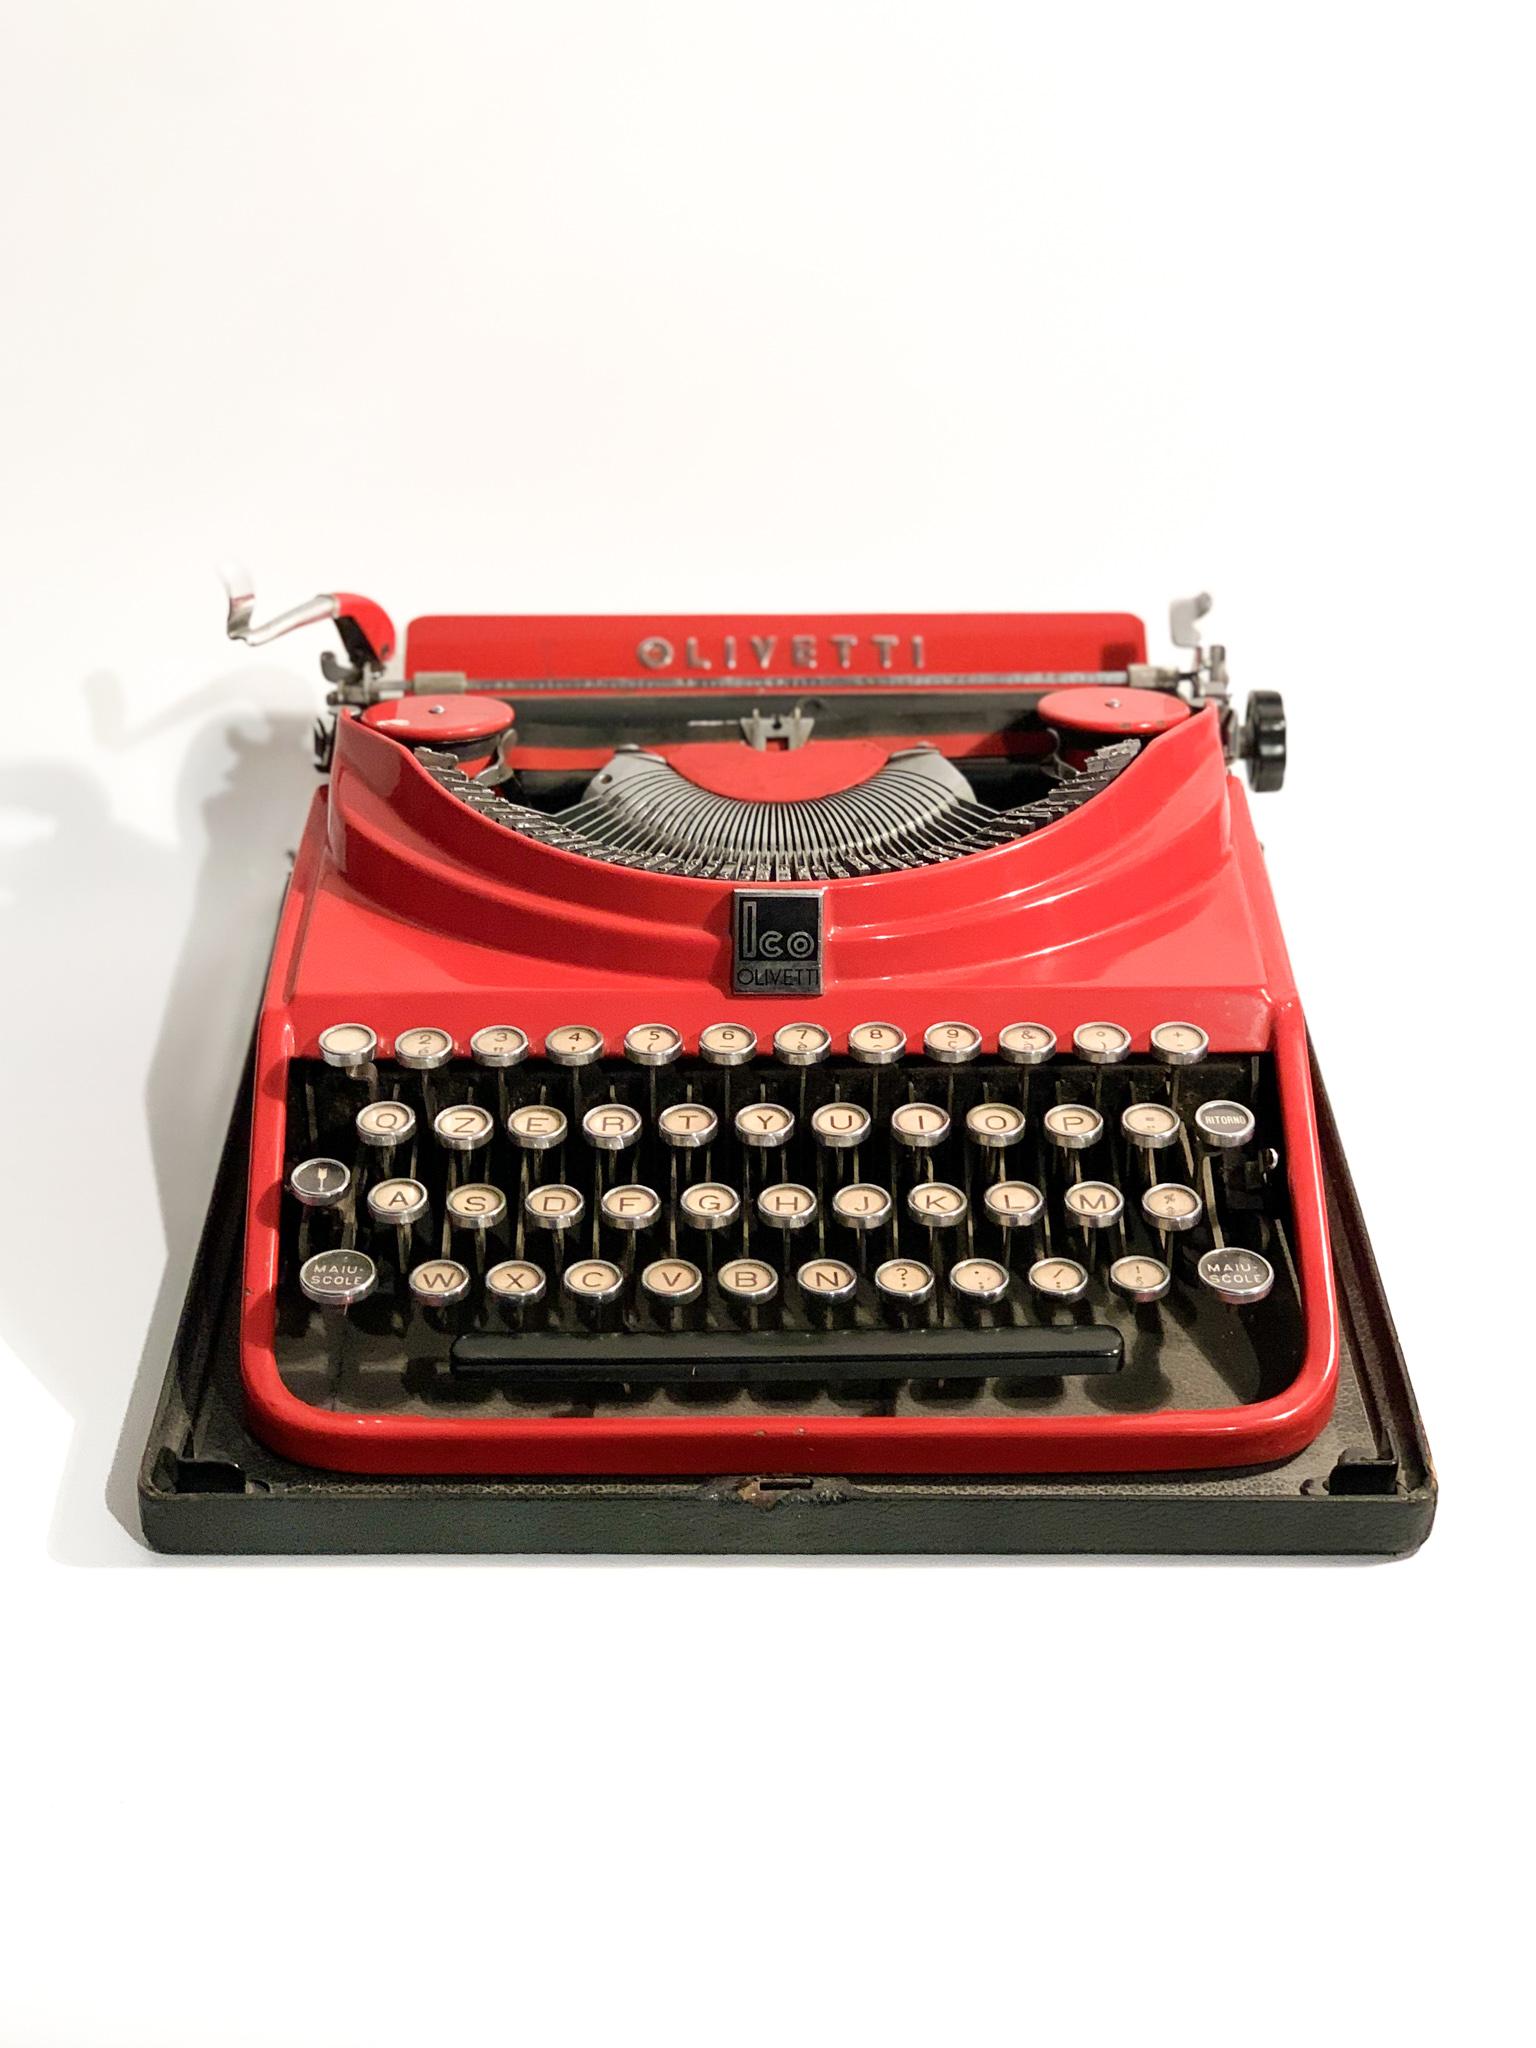 Vintage red typewriter, Olivetti ICO model, in production from 1932 to 1950. 

Thanks to the idea of Adrian Olivetti and Gino Levi Martinaroli, head of the company's Projects and Studies Office at the time, the first Olivetti portable typewriter was